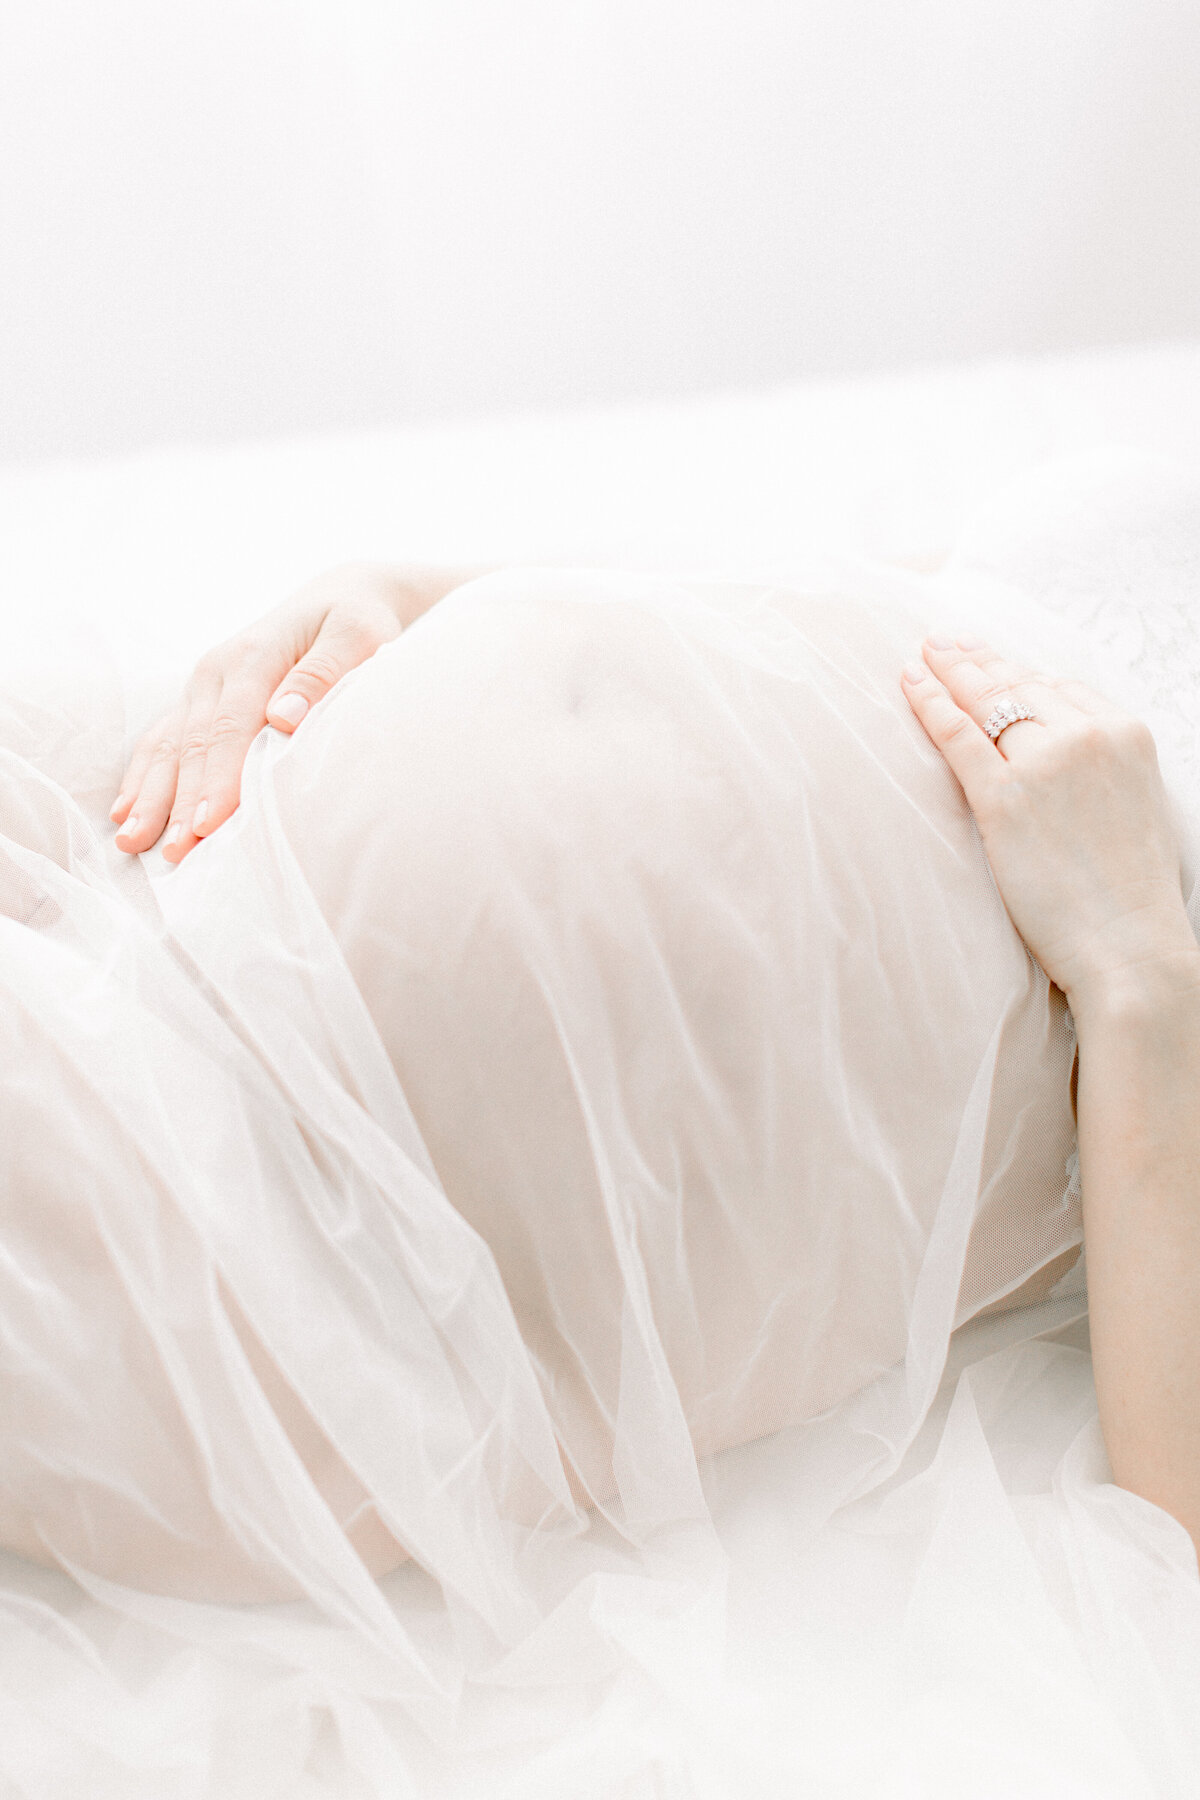 Portrait of expecting mothers belly with tulle draped over